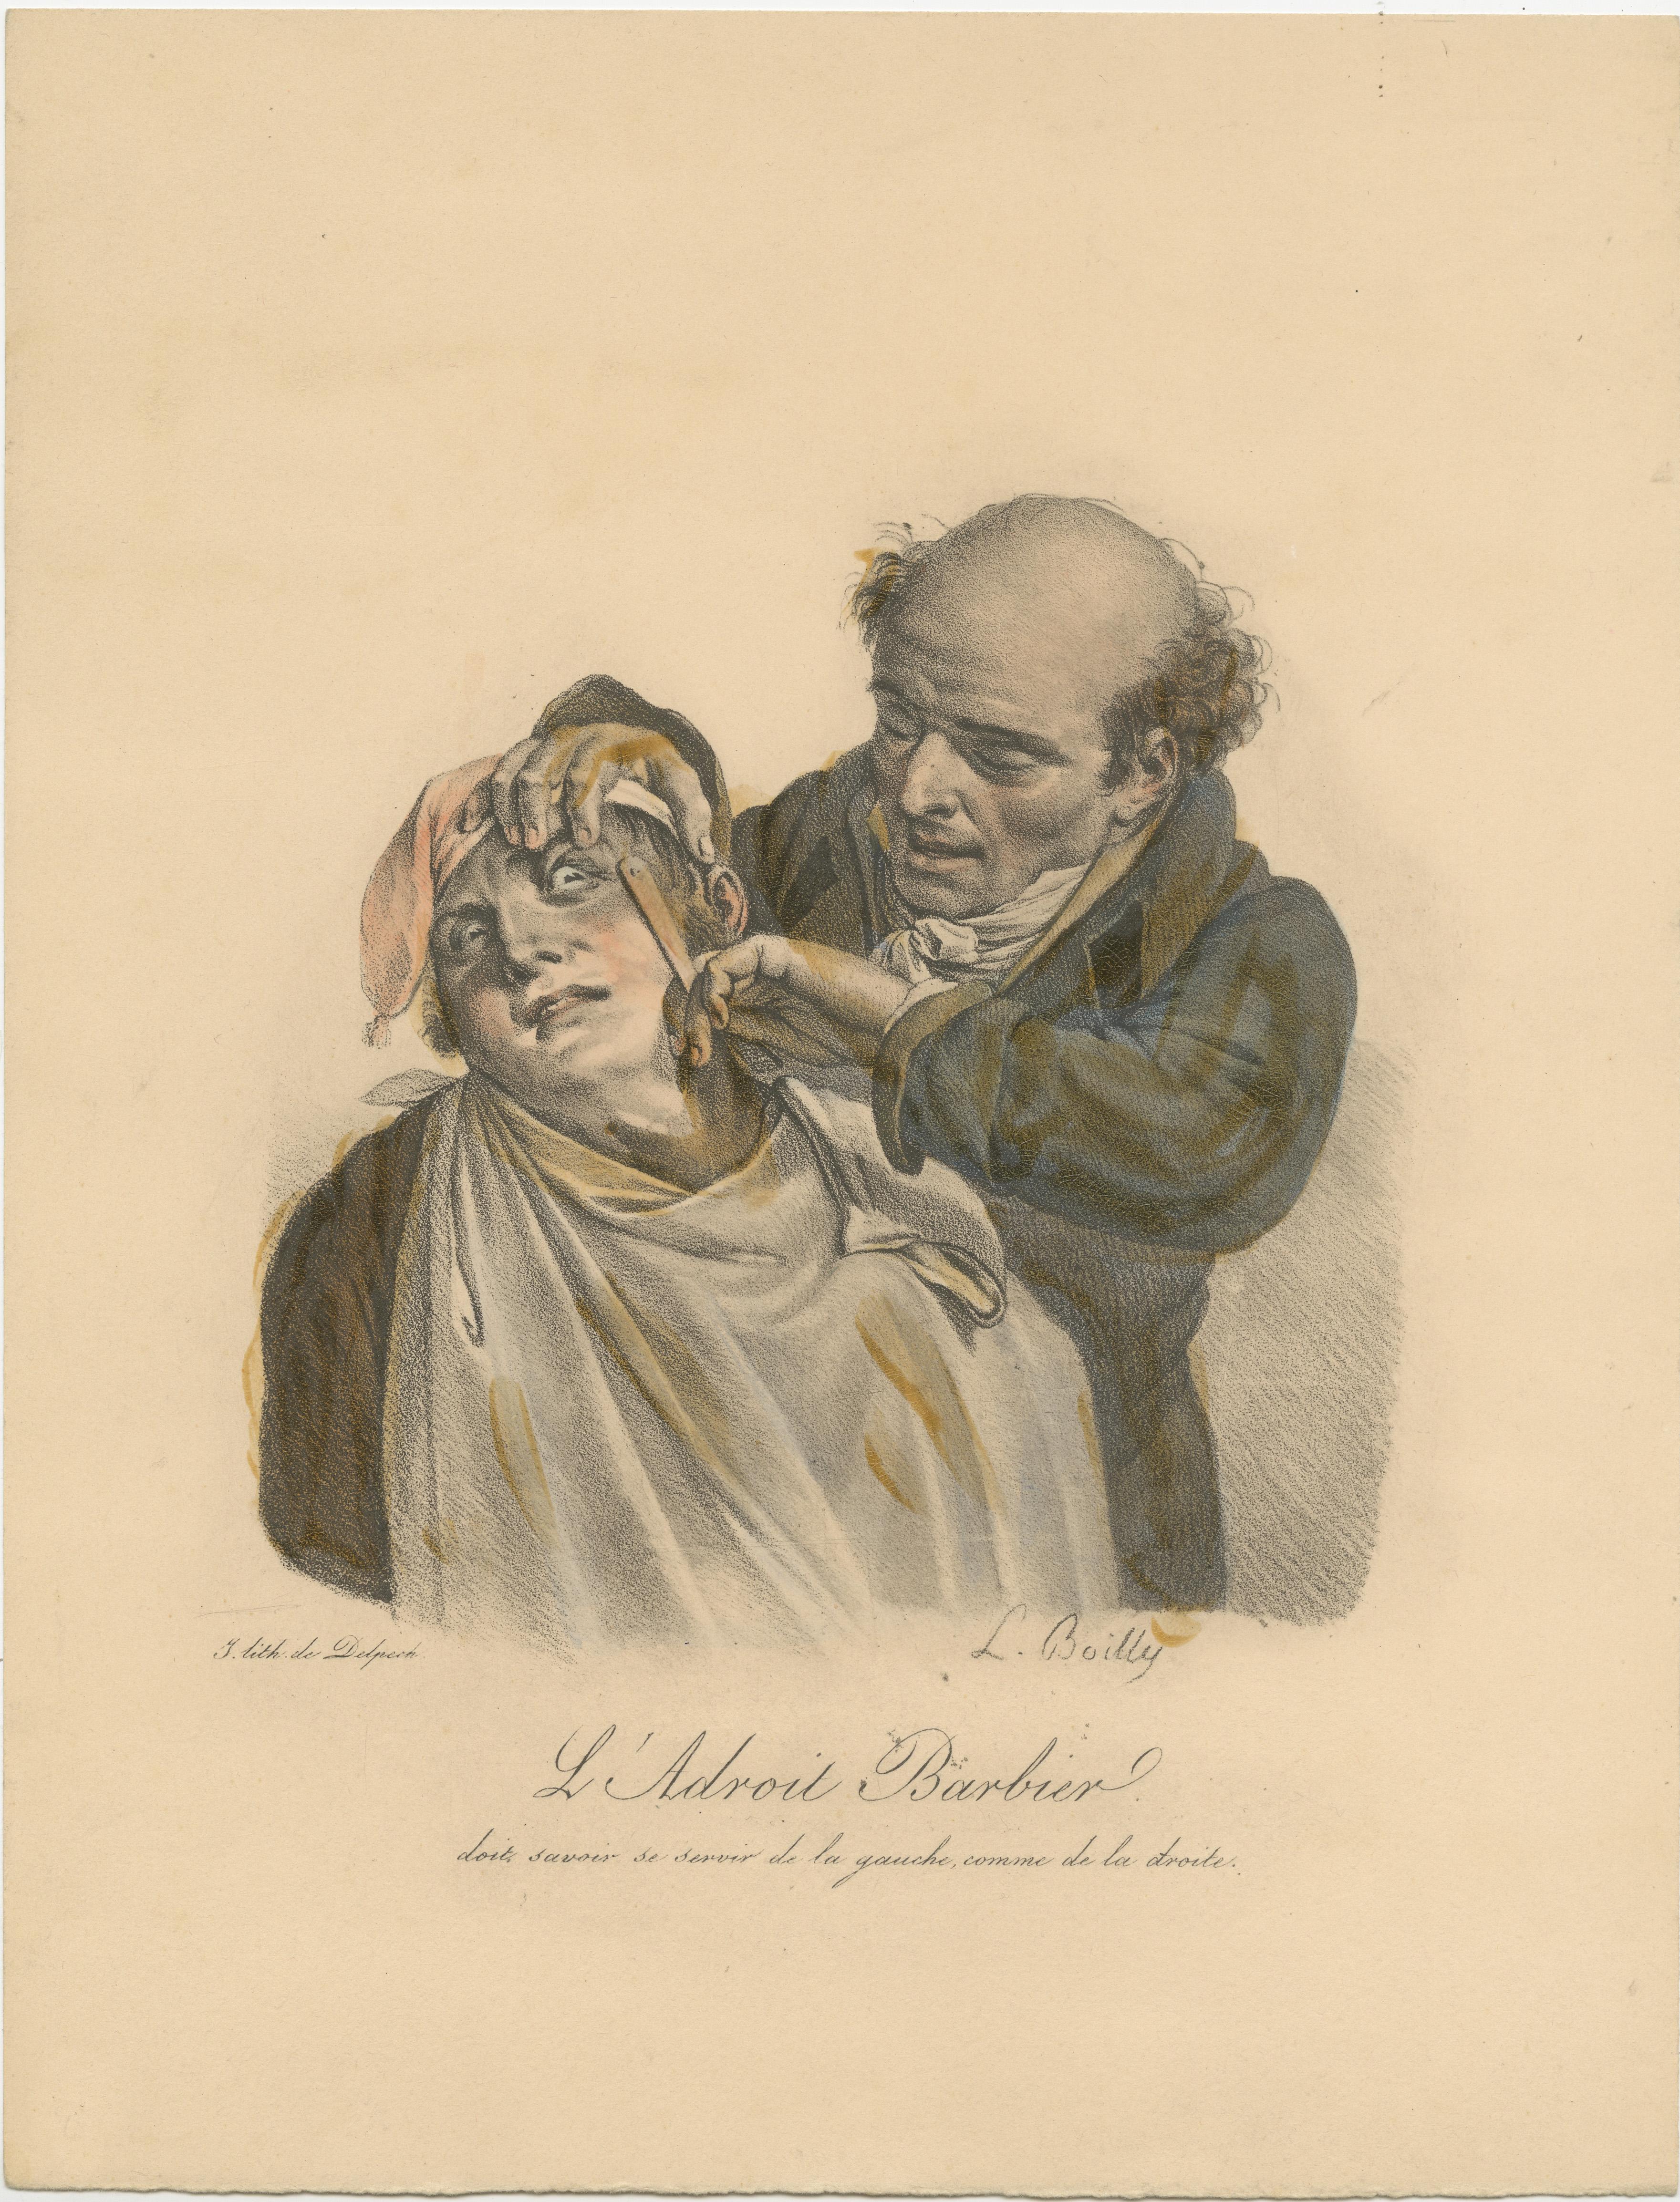 Antique print titled 'L'Adroit Barbier (..)'. Hand Colored Lithograph of a barber. Originates from Boilly's 